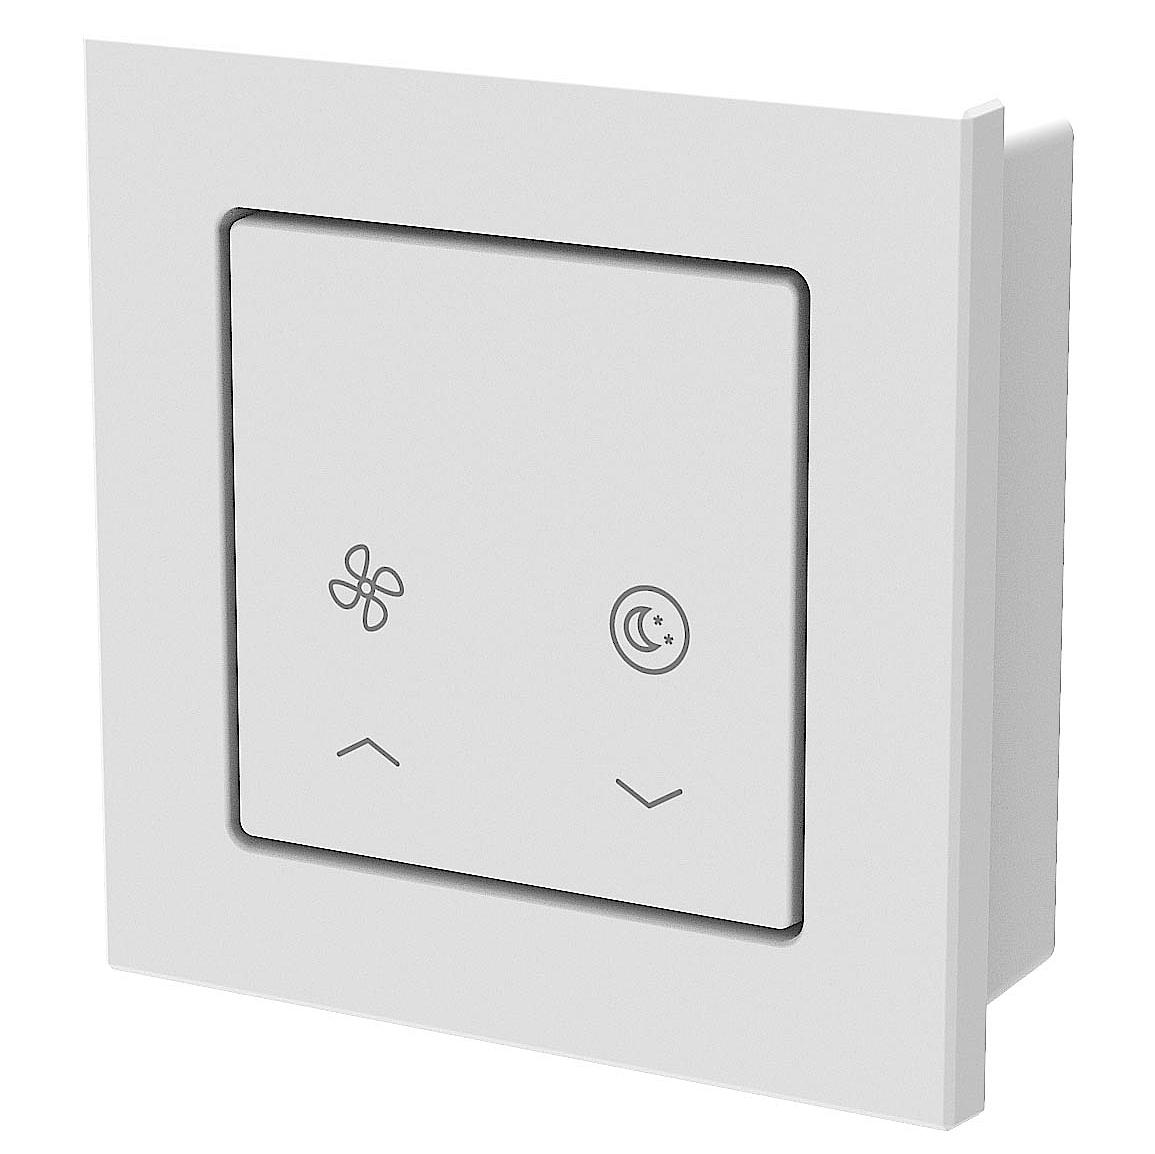 Bluetooth switch operating element for the x-well decentralised residential ventilation system.